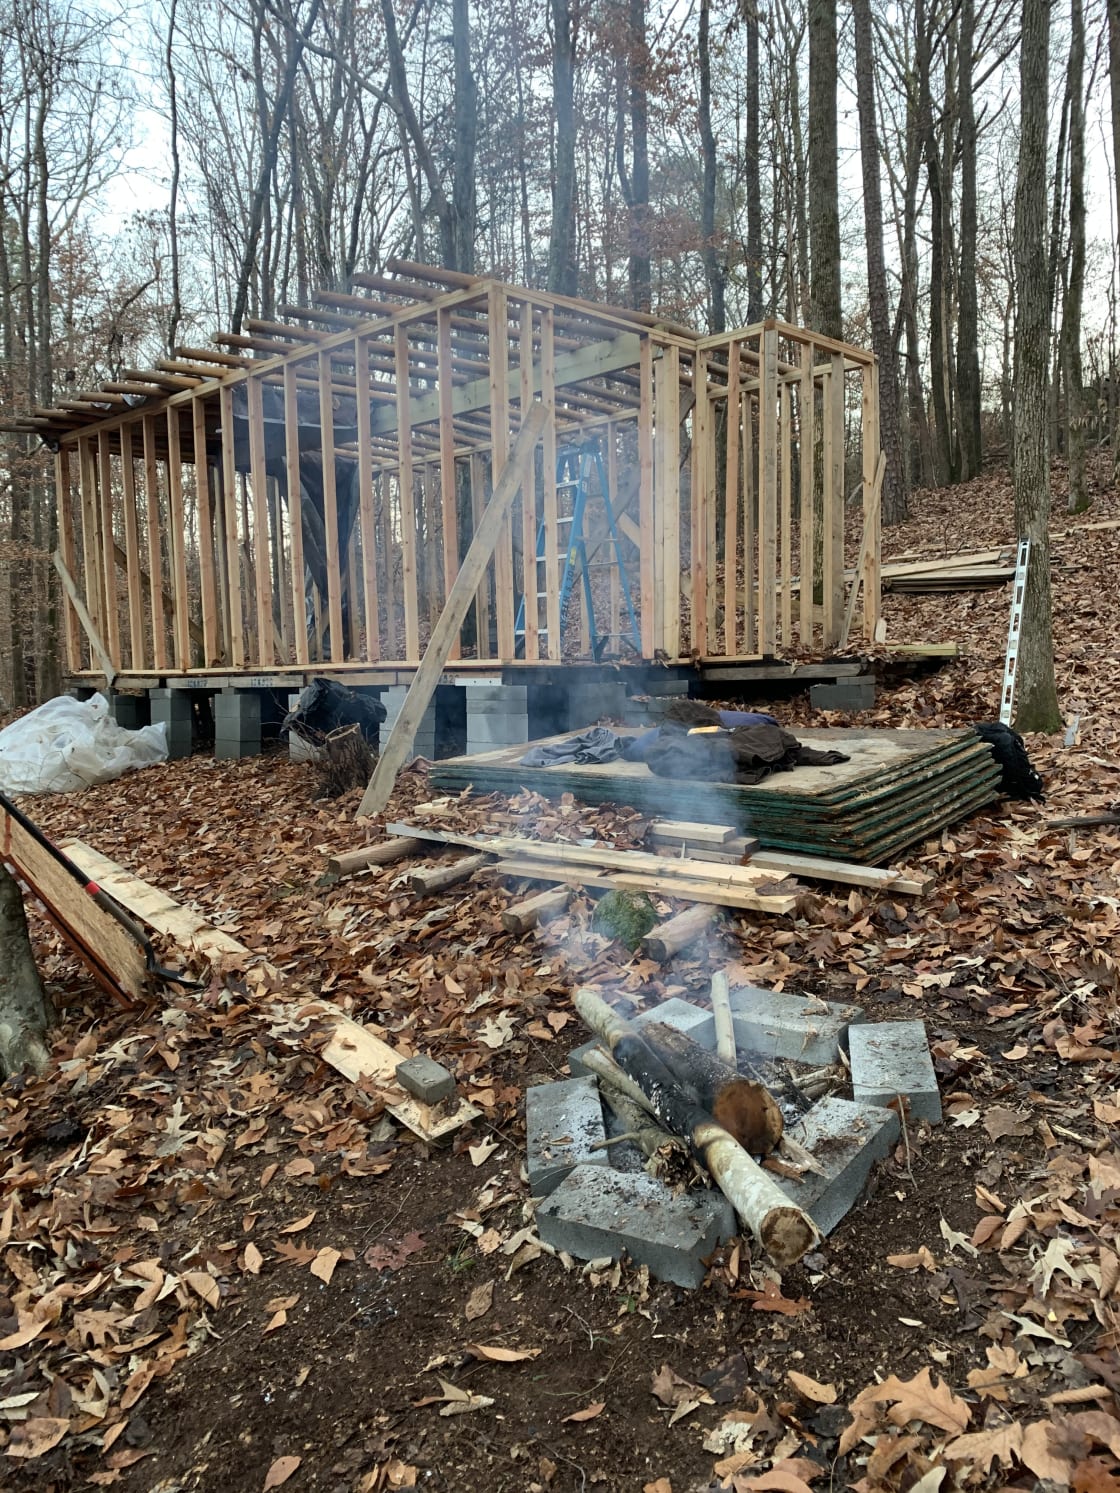 Tiny House/Shack early construction and small fire pit halfway down the property